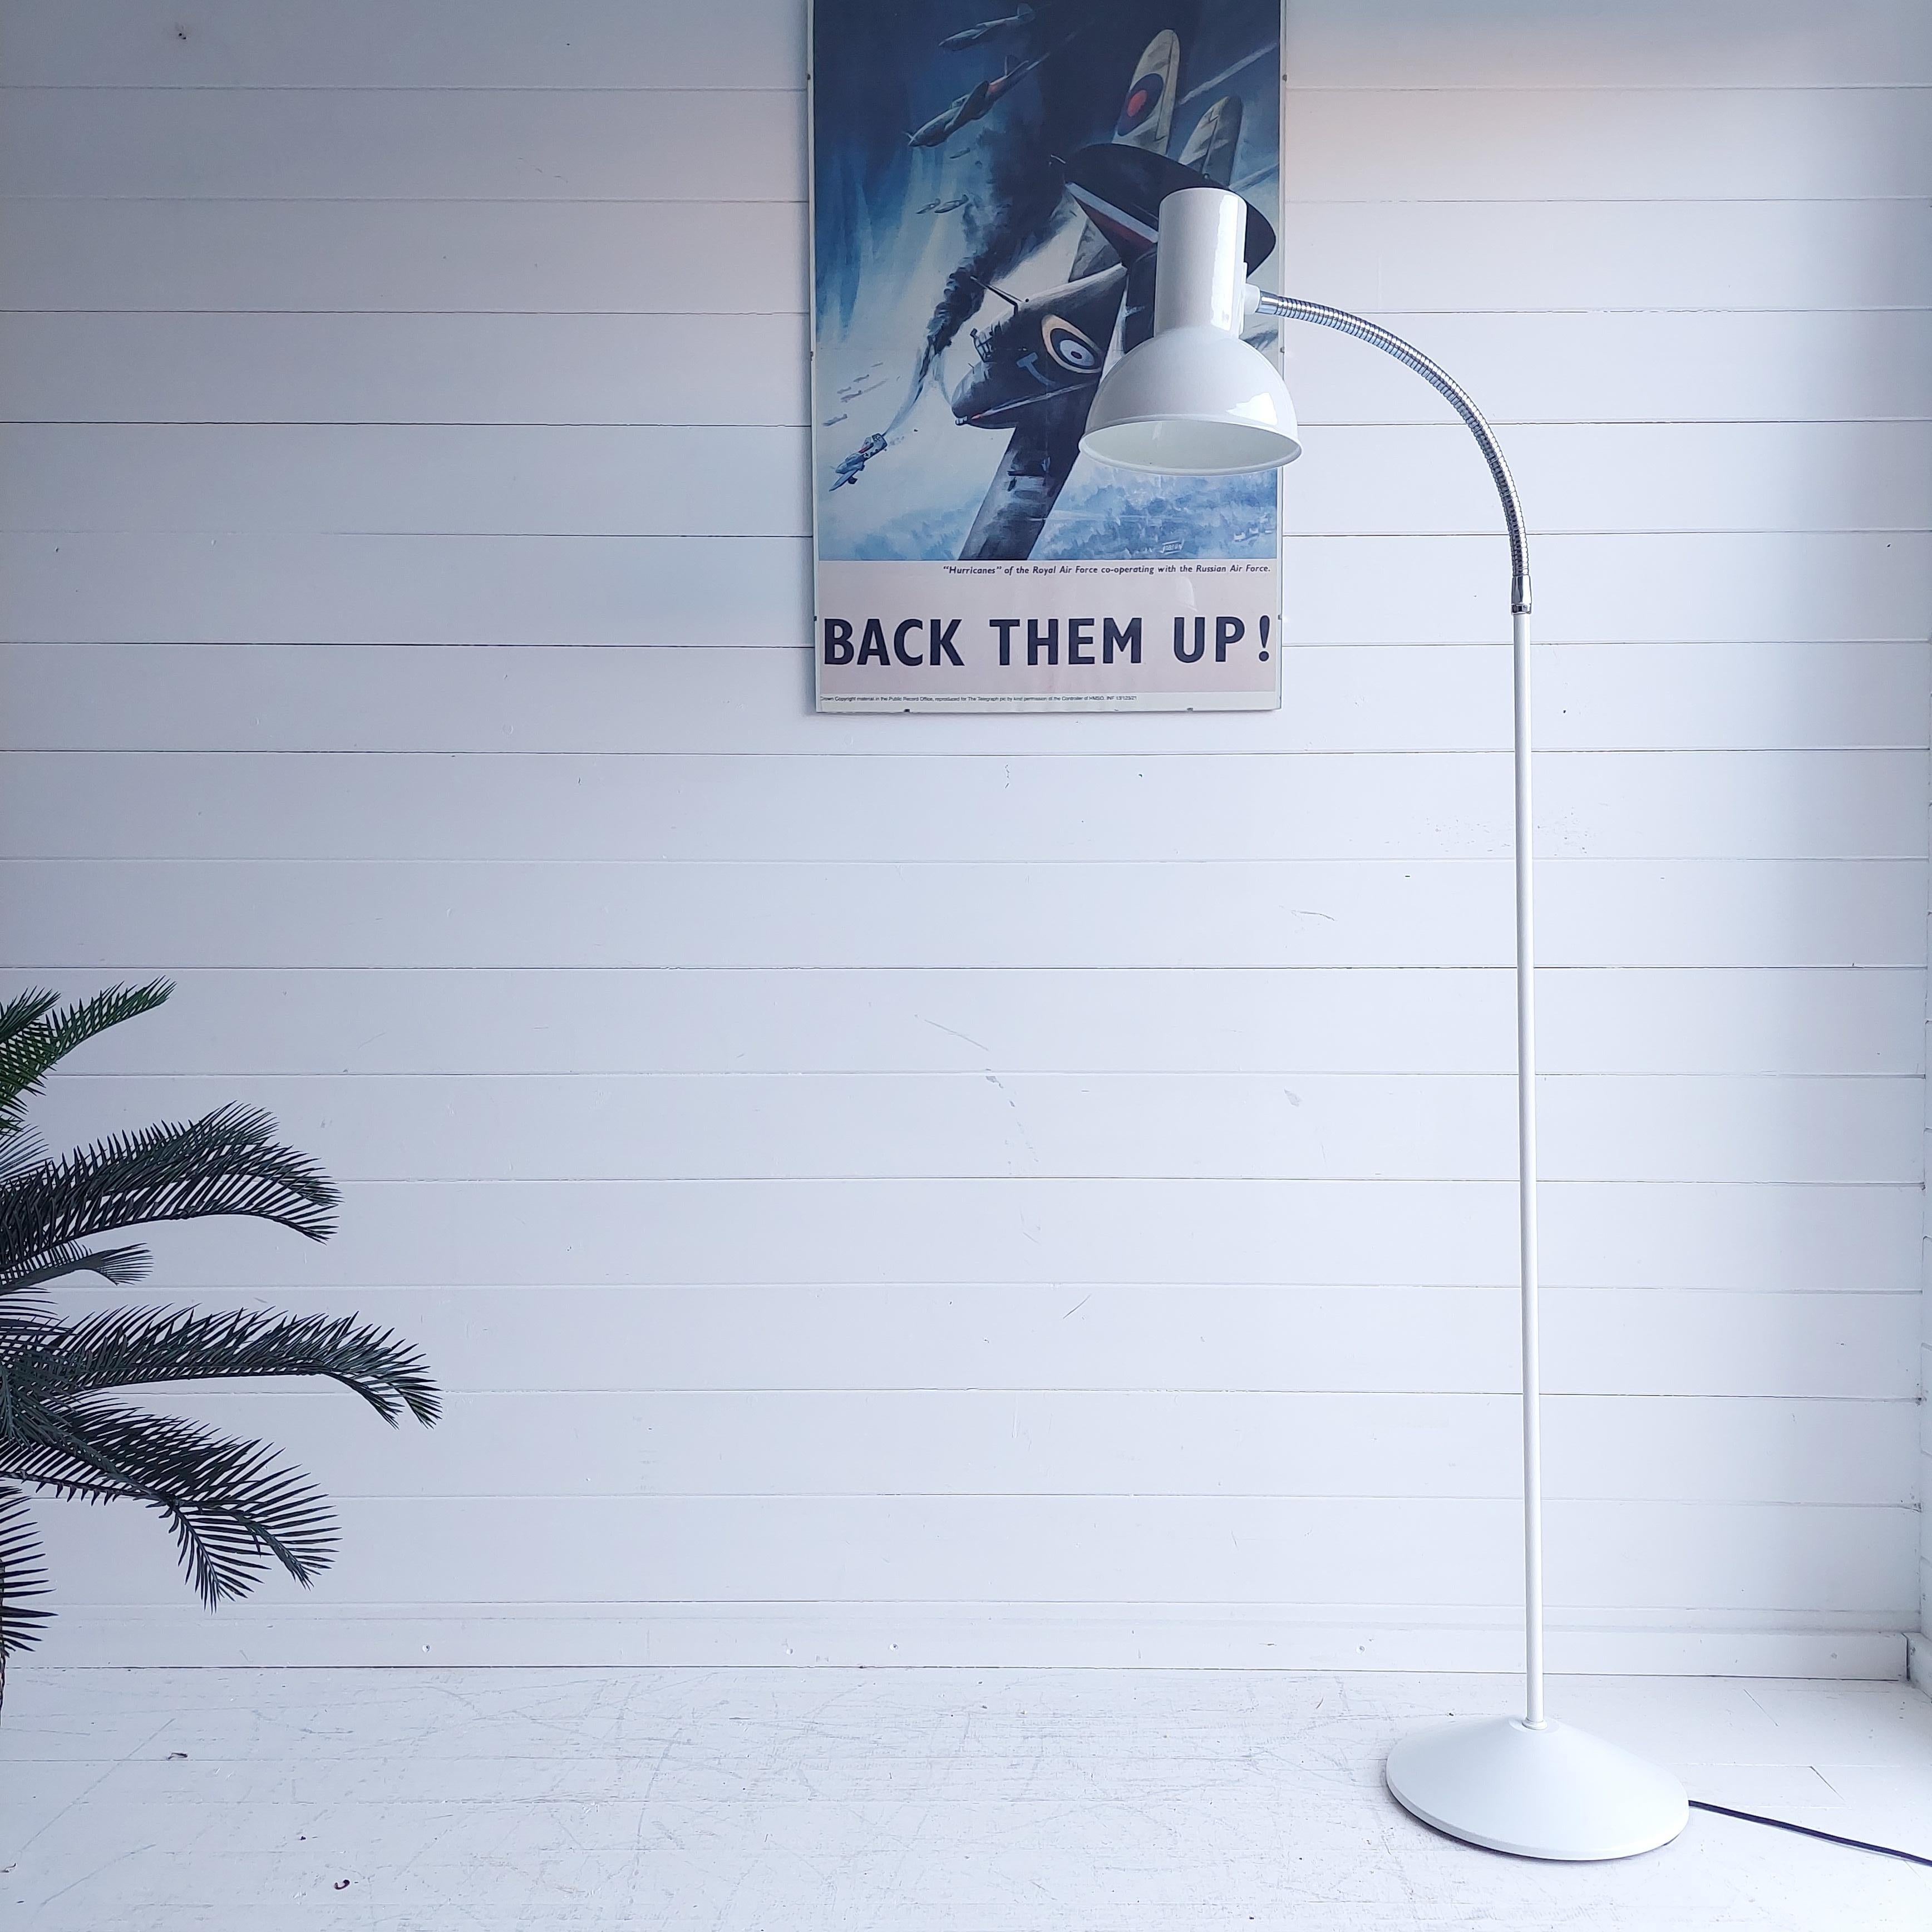 Vintage Goose neck floor standing Maclamp.
A Stunning Vintage white Floor / Standard Terence Conran design manufactured by Maclamp for Habitat

Midcentury gooseneck floor lamp with metal shade. 
Light is easy to direct with adjustable neck to